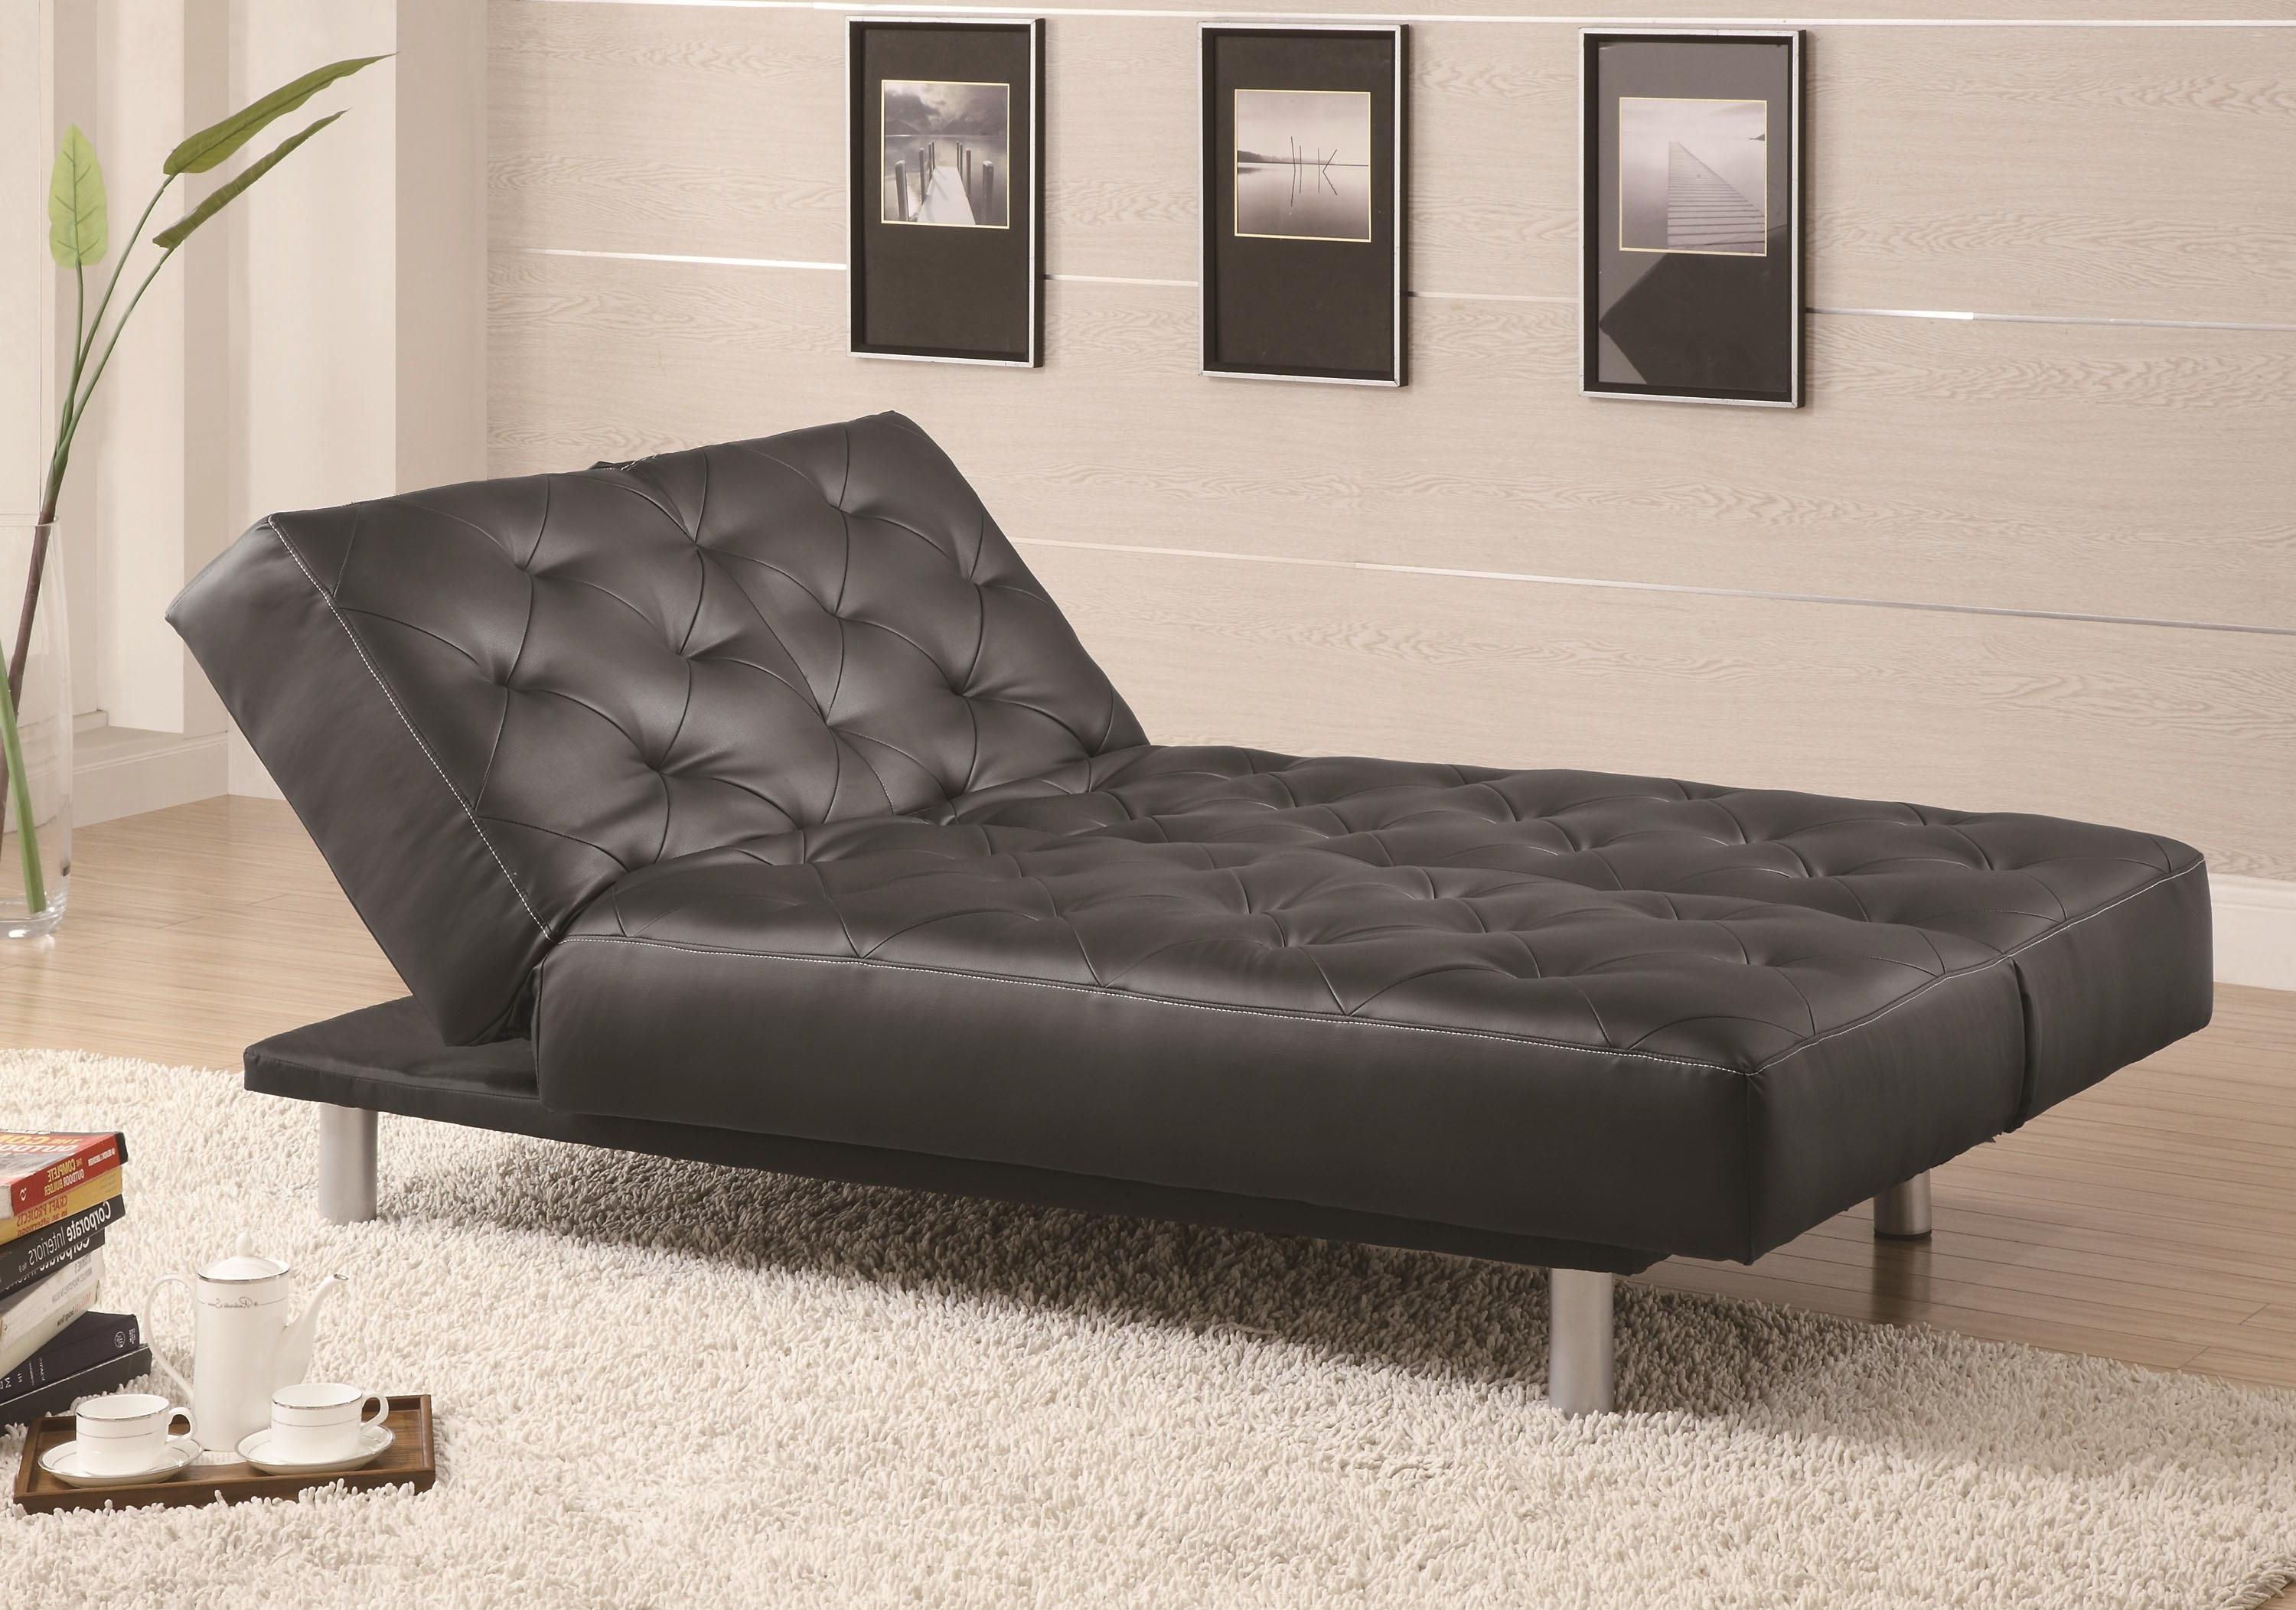 Coaster Chaise Lounges Pertaining To Most Up To Date Coaster Sofa Beds And Futons Black Vinyl Tufted Sofa Bed/oversize (View 14 of 15)